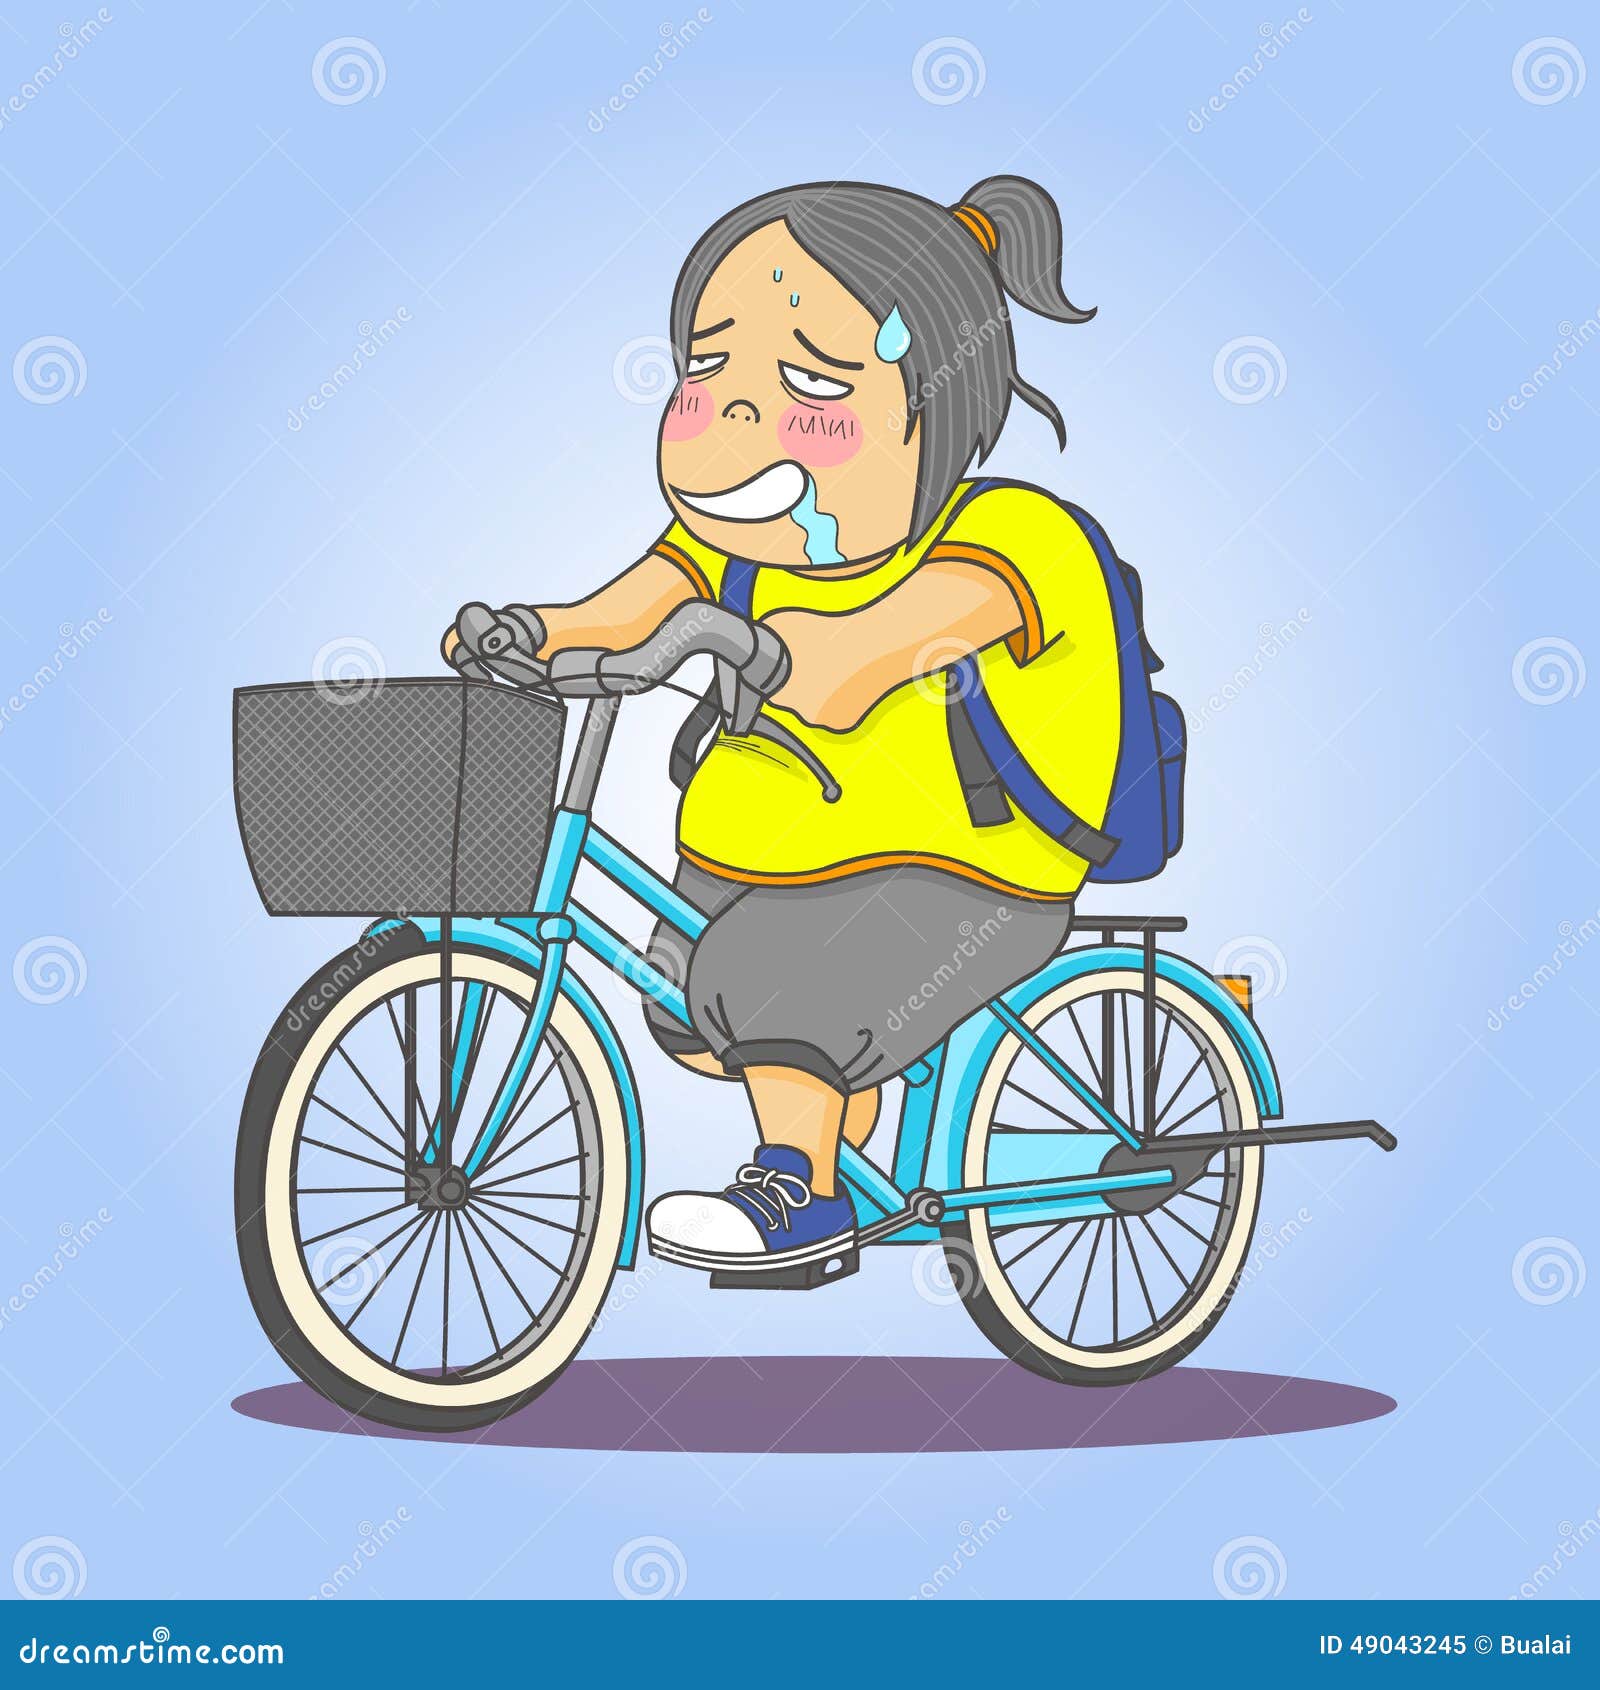 Girl riding bicycle stock vector. Illustration of humor - 49043245